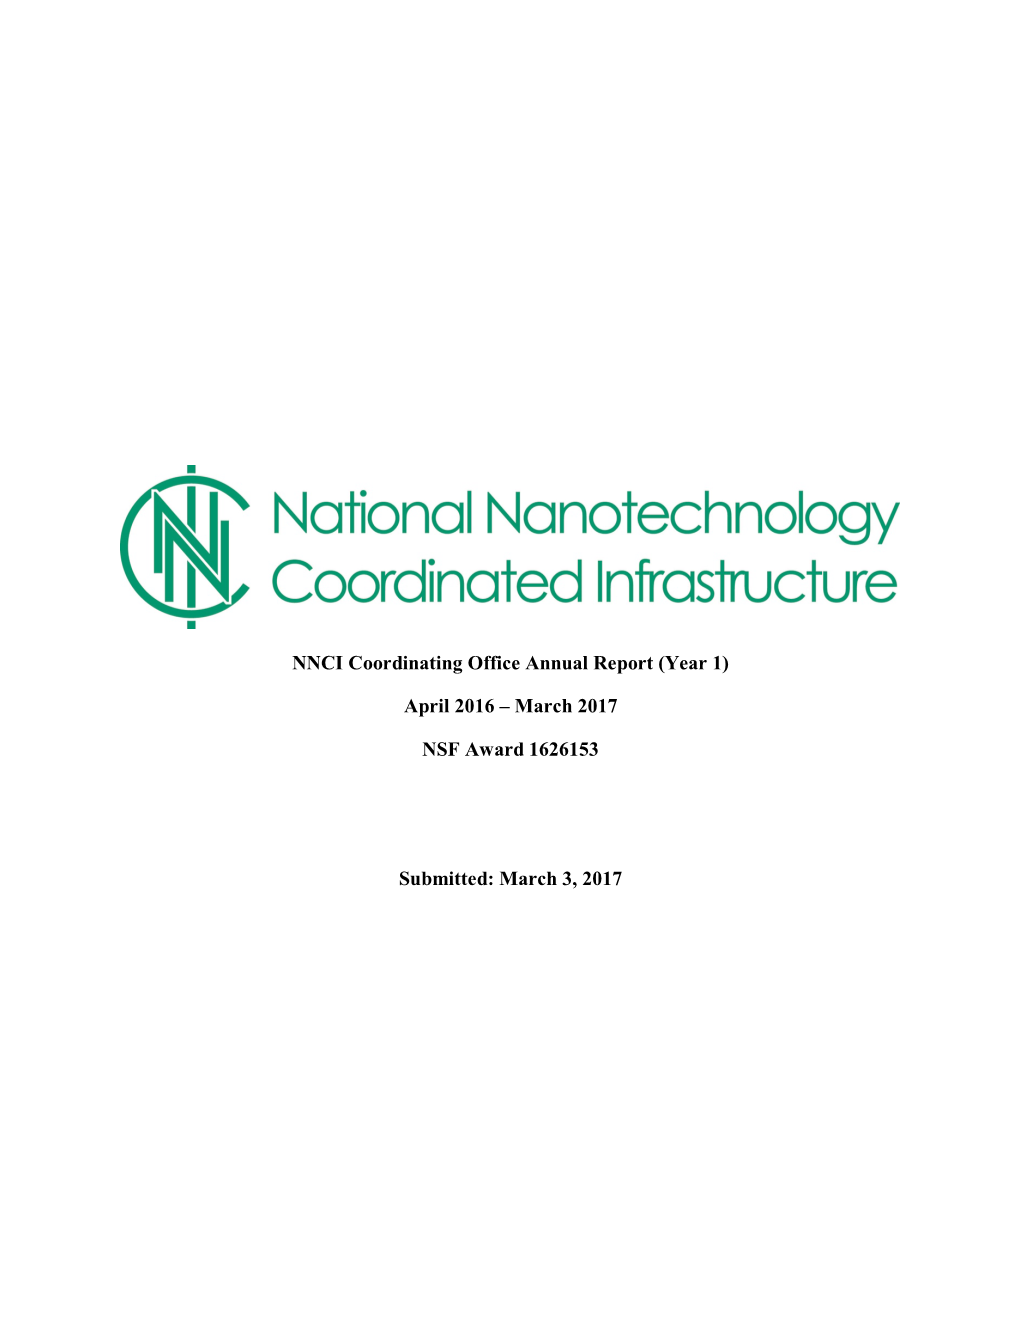 NNCI Coordinating Office Annual Report (Year 1) April 2016 – March